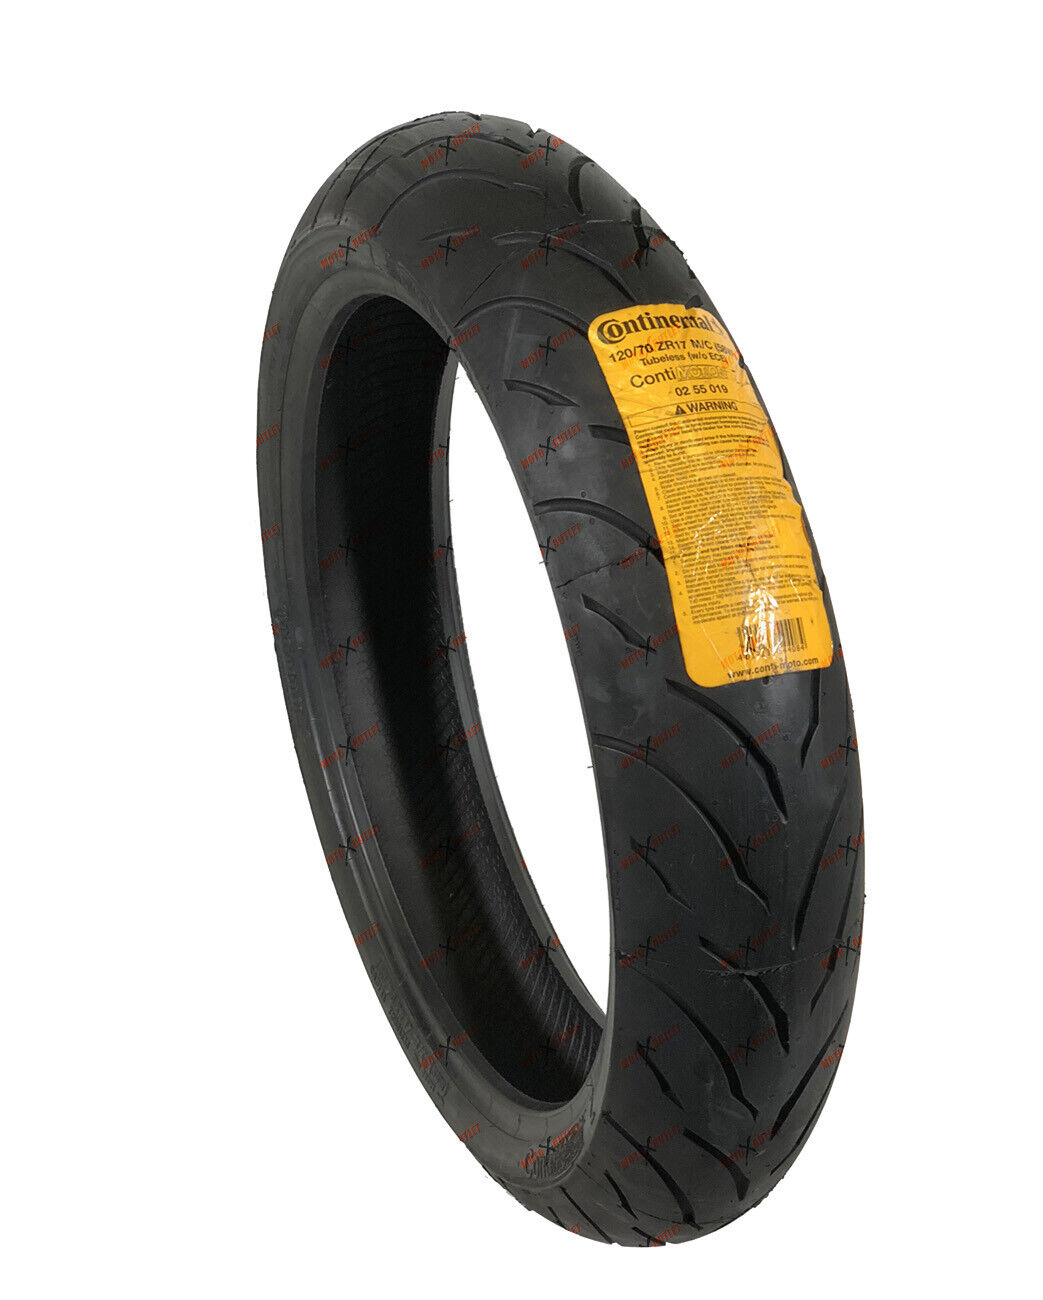 Continental 120/70ZR17 Motorcycle Tire Front 120/70-17 Conti Motion 120-70-17